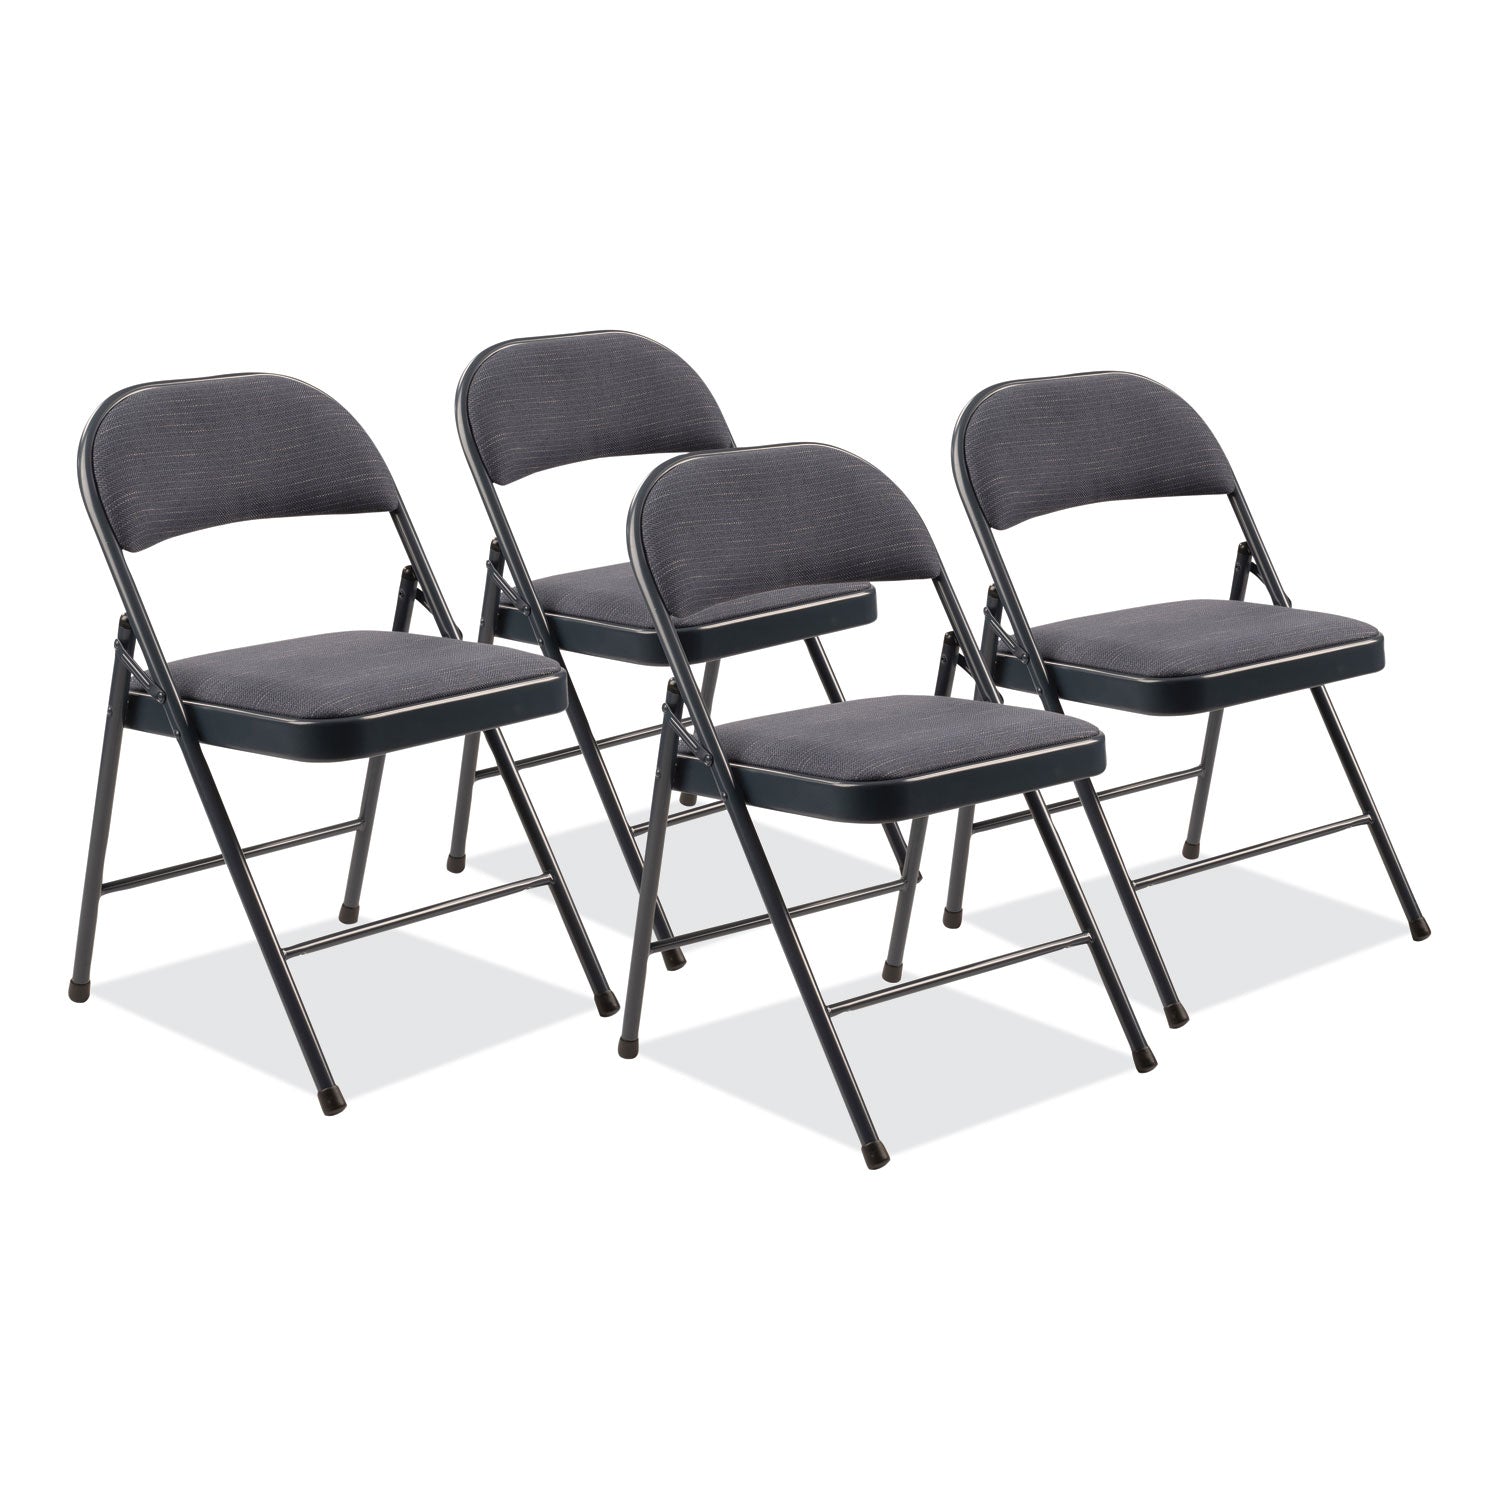 970-series-fabric-padded-steel-folding-chair-supports-250-lb-1775-seat-ht-star-trail-blue-4-ctships-in-1-3-bus-days_nps974 - 1